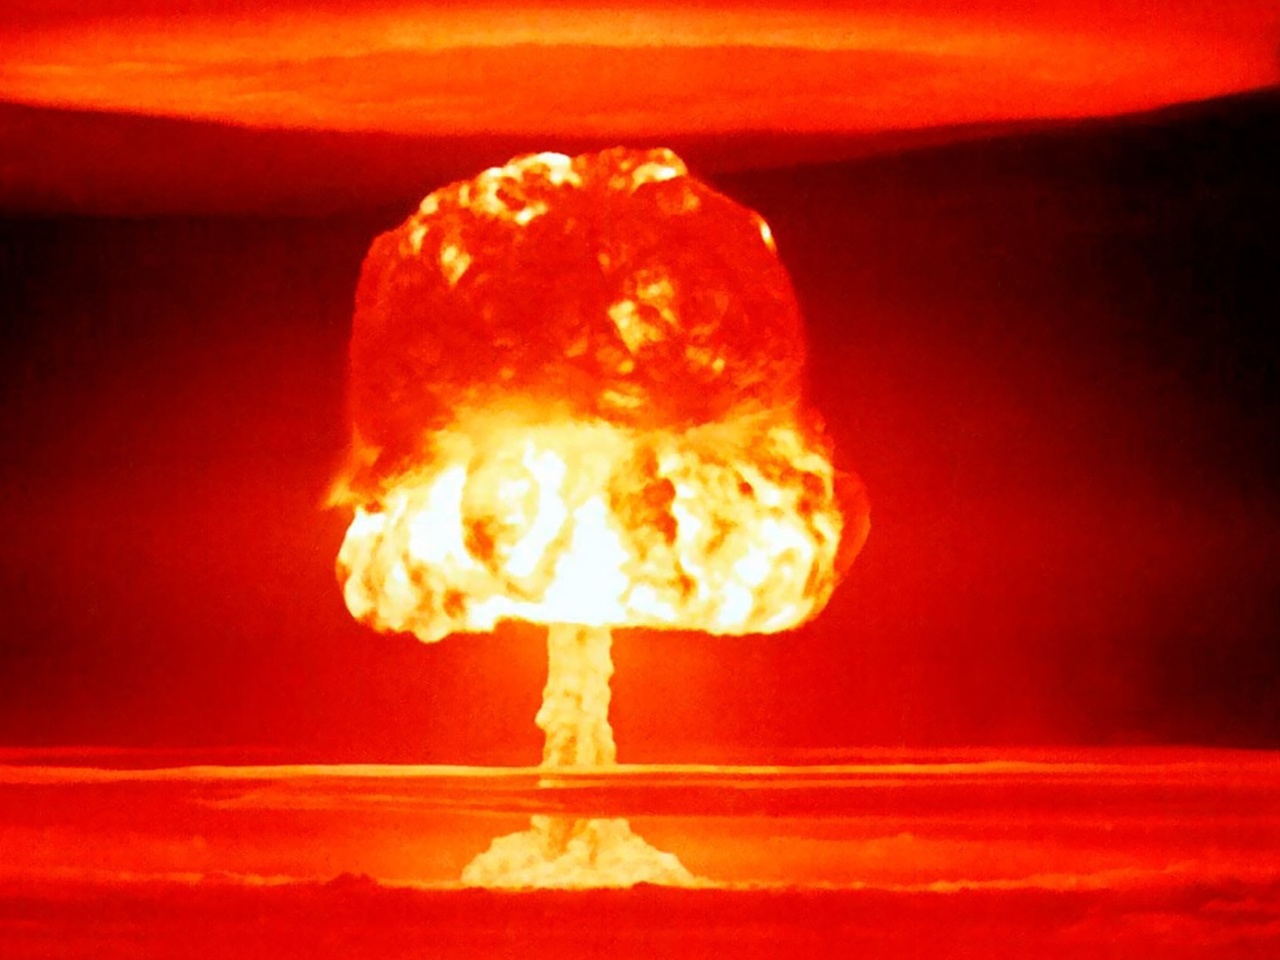 Nuclear explosion wallpaper 1280x960